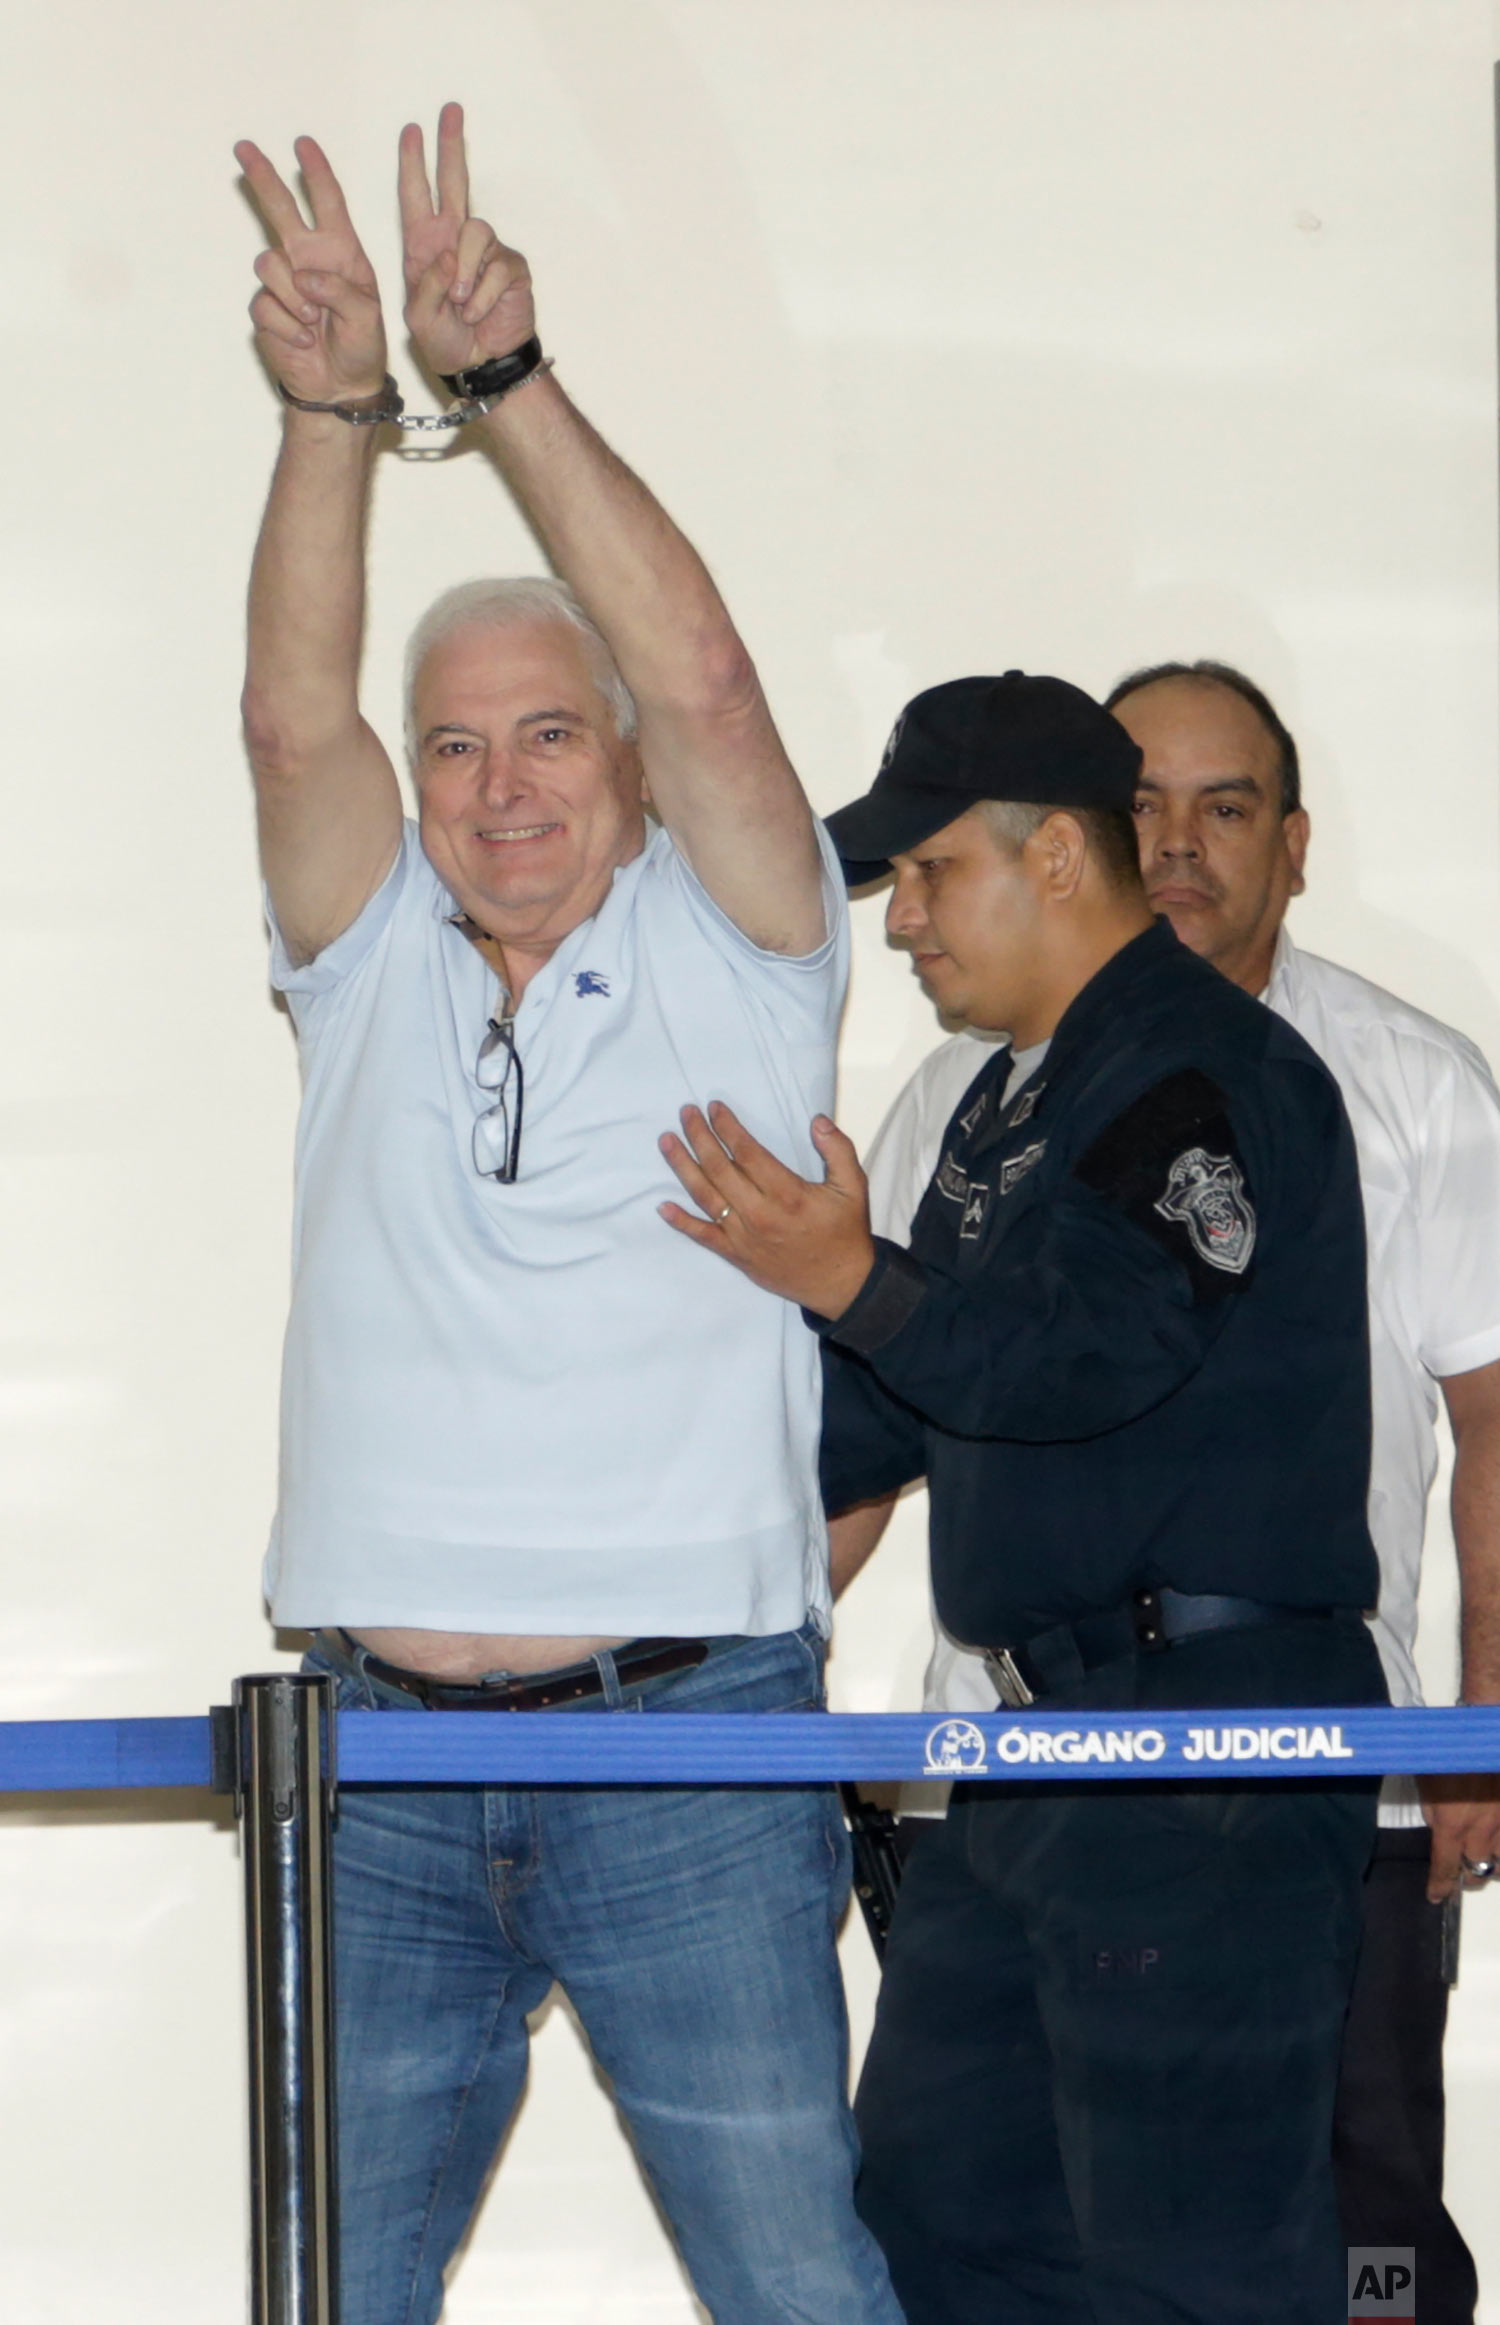  Former Panamanian President Ricardo Martinelli gestures victory from his handcuffs while escorted away from his hearing at the Supreme Court in Panama City, June 11, 2018. Martinelli returned to Panama to face political espionage and embezzlement ch